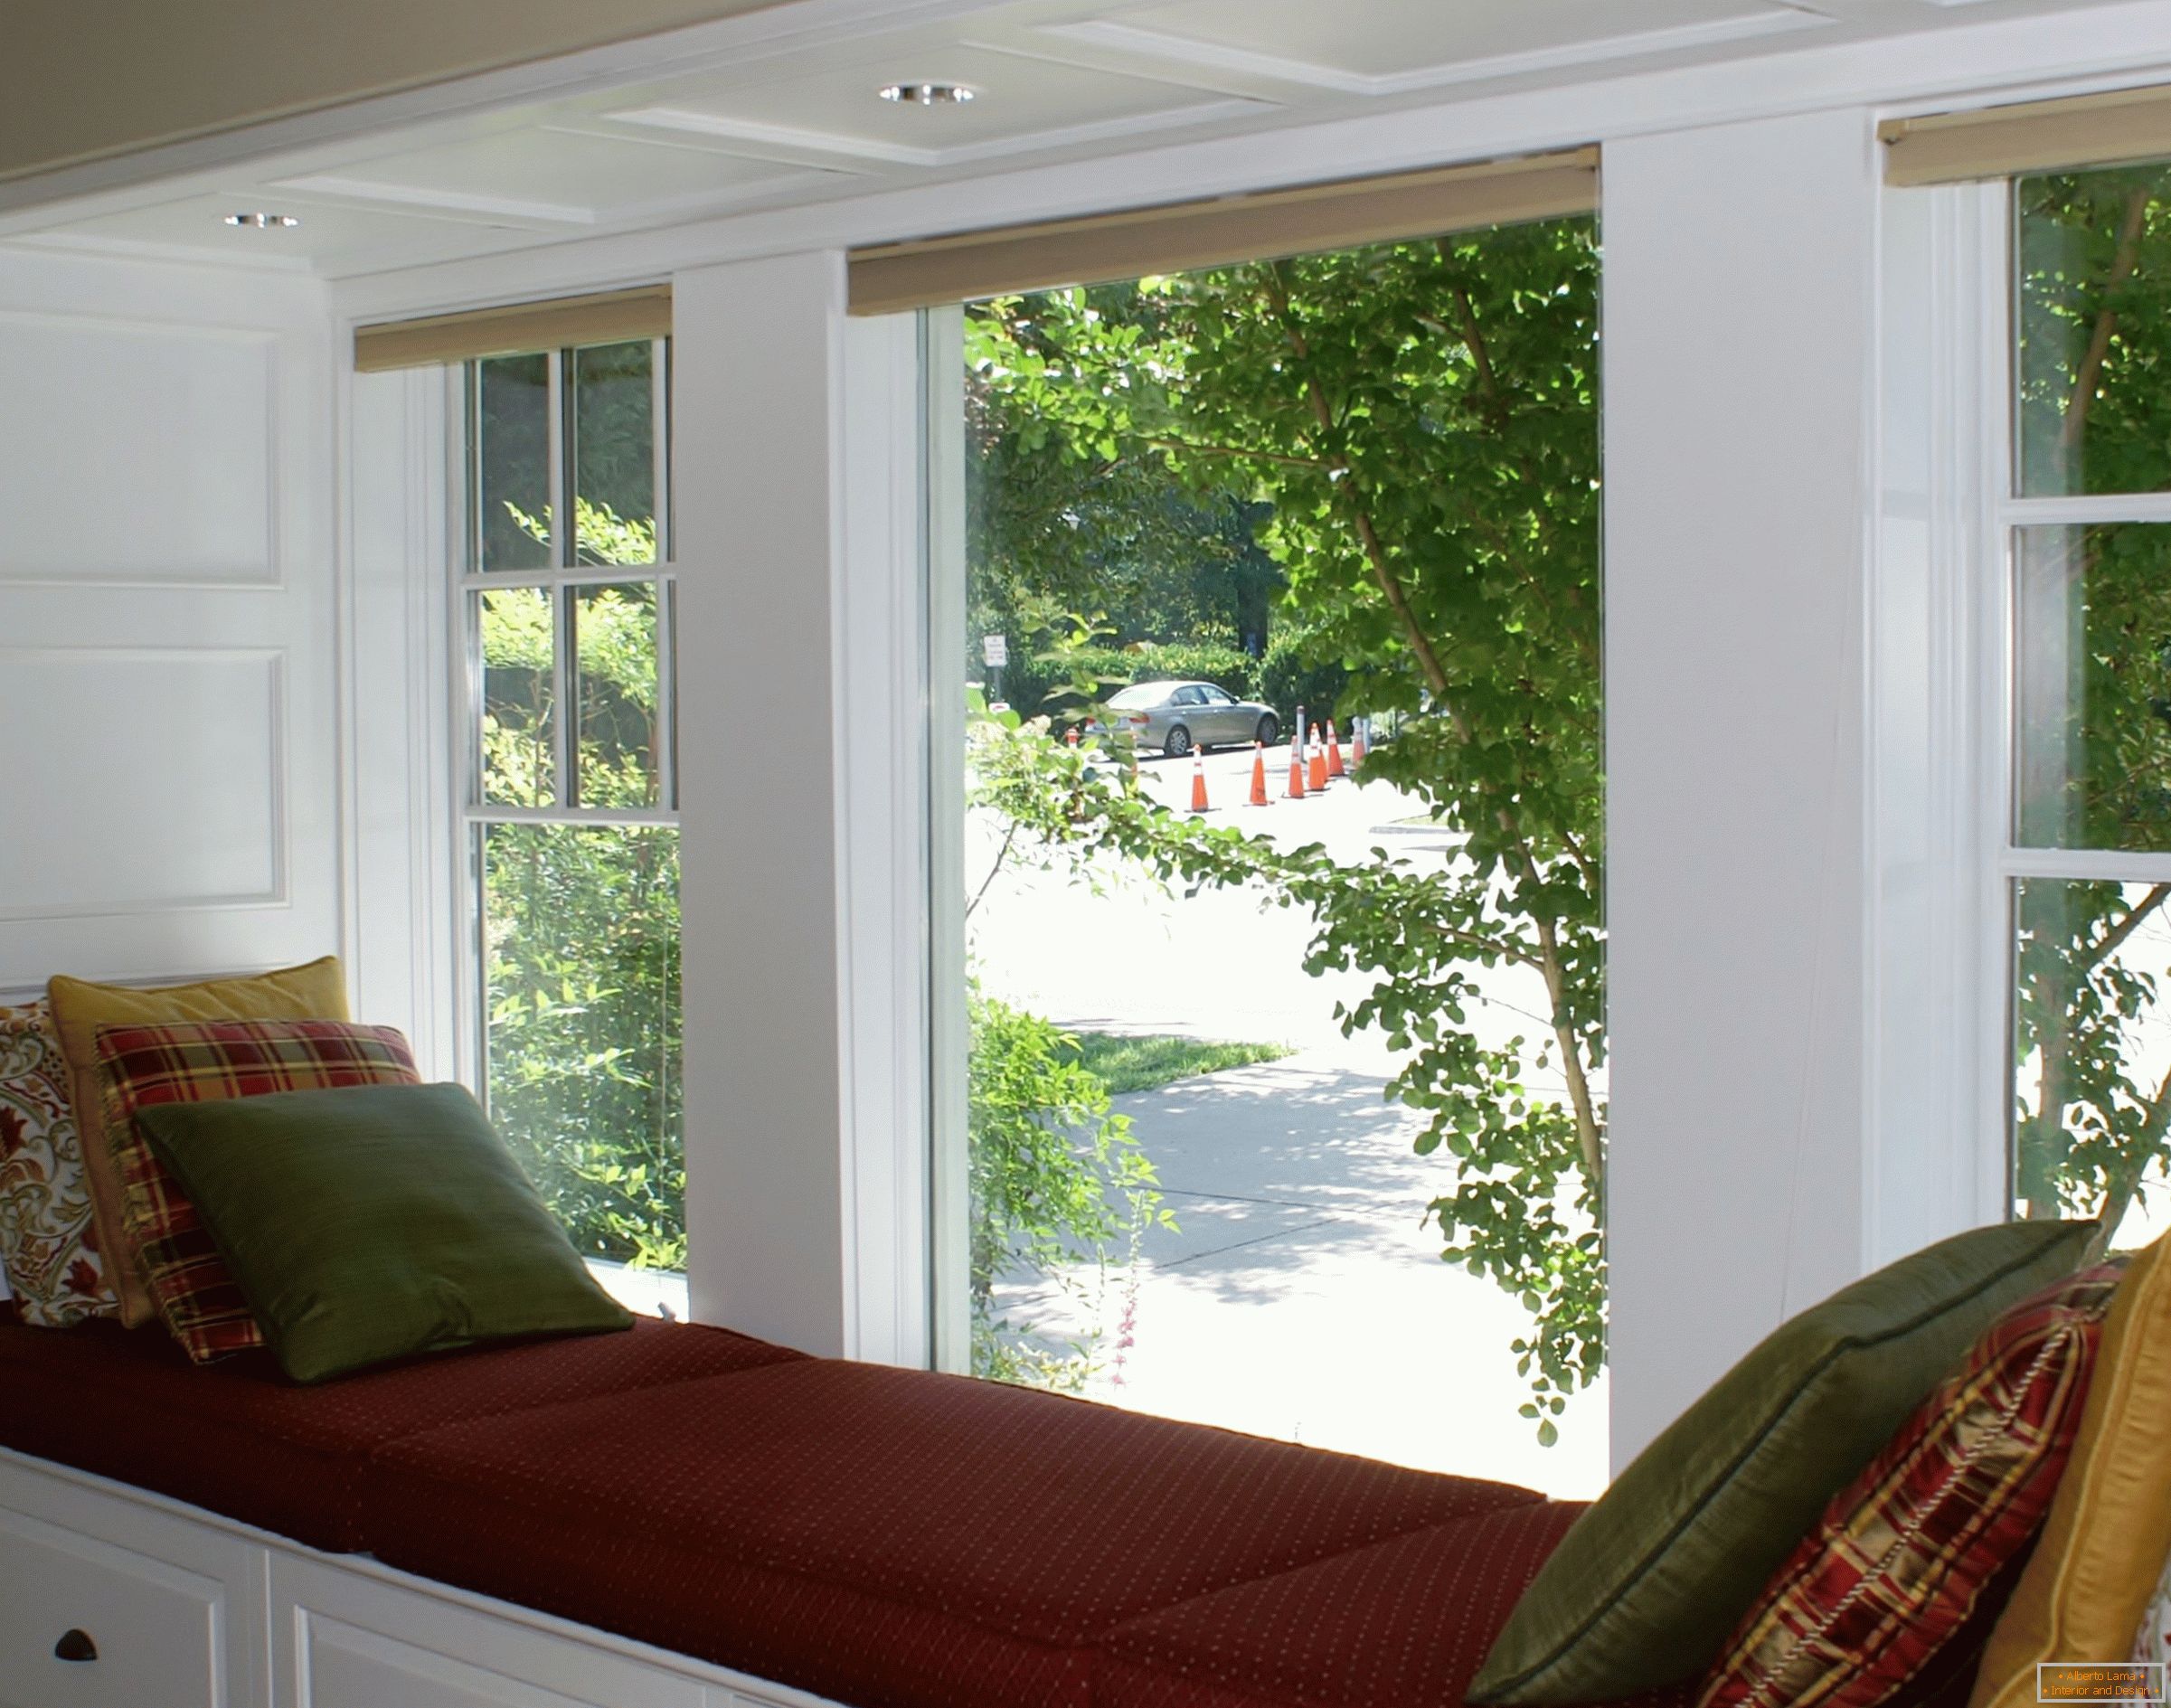 The design of the window sill as a recreation area